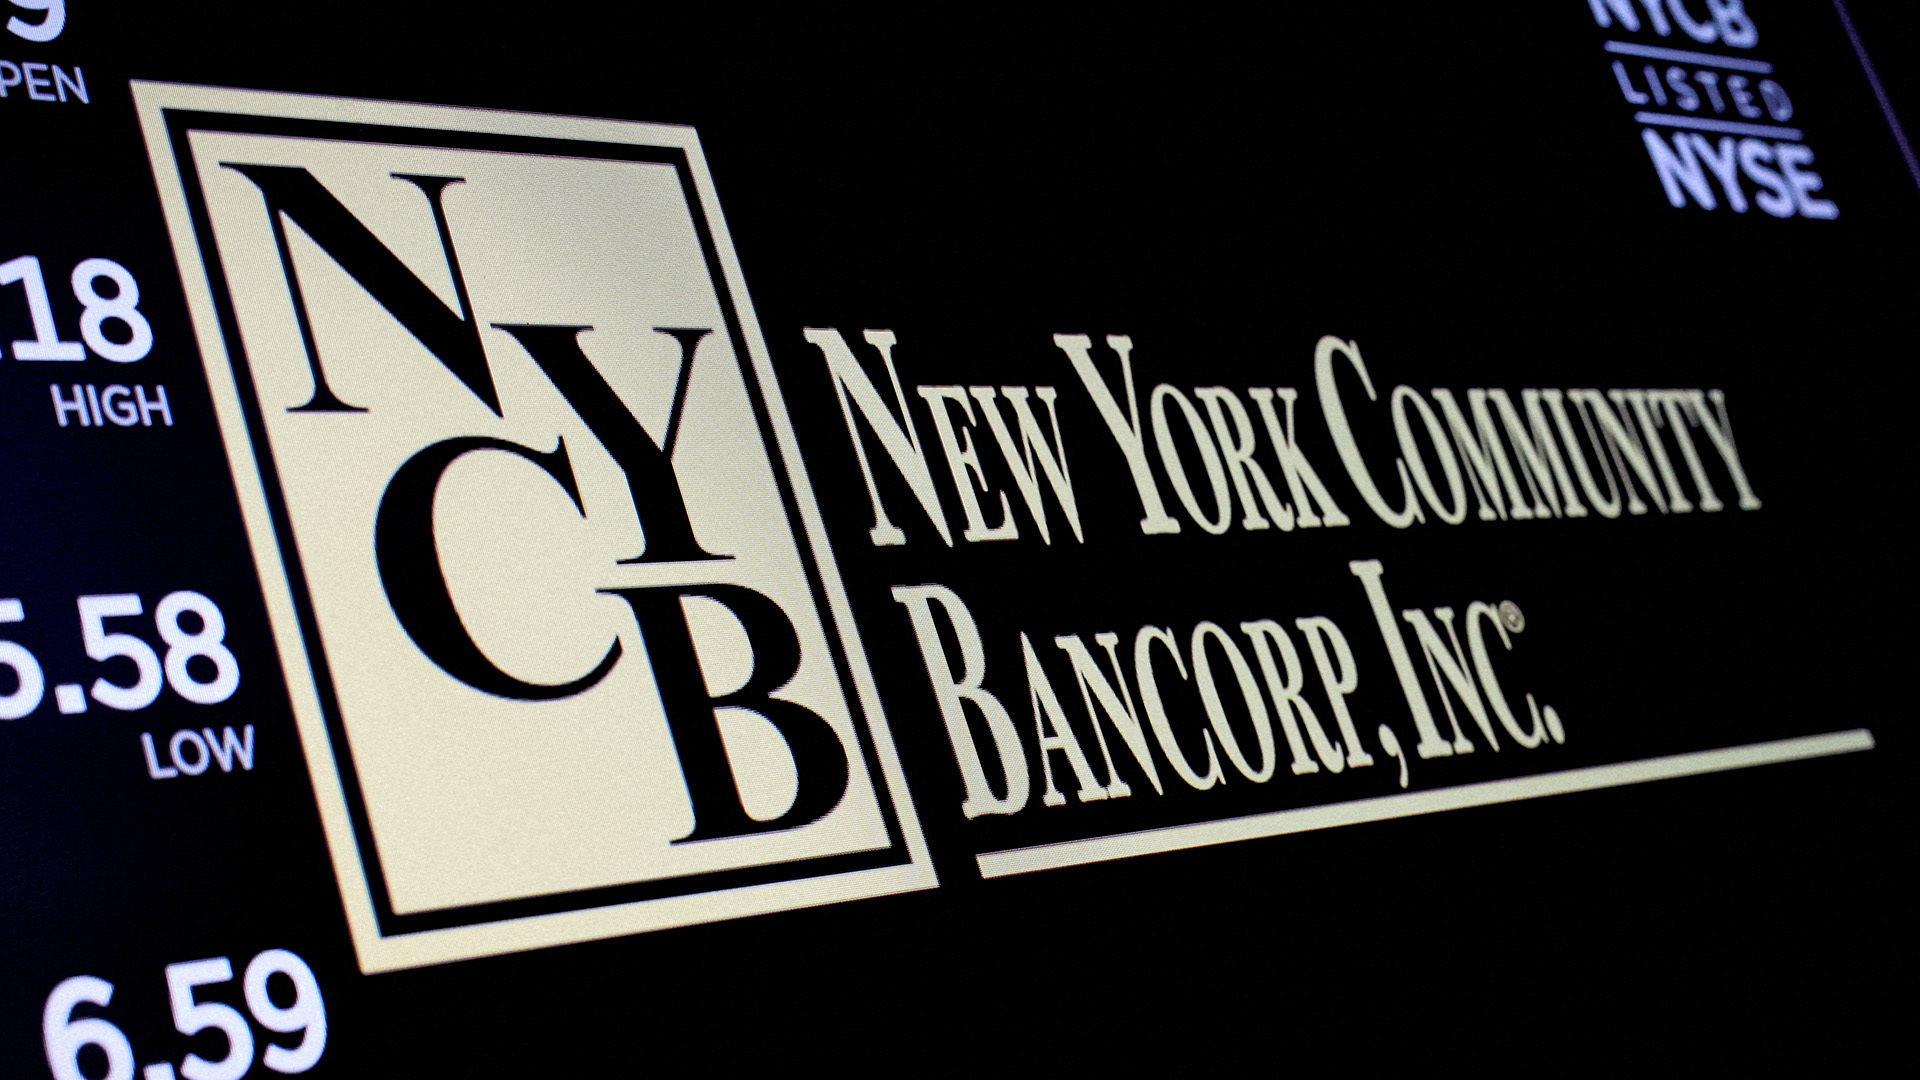 A year ago, NYCB was a banking crisis savior, buying  billion in assets from failed Signature Bank. Now it's a bank in trouble of its own.